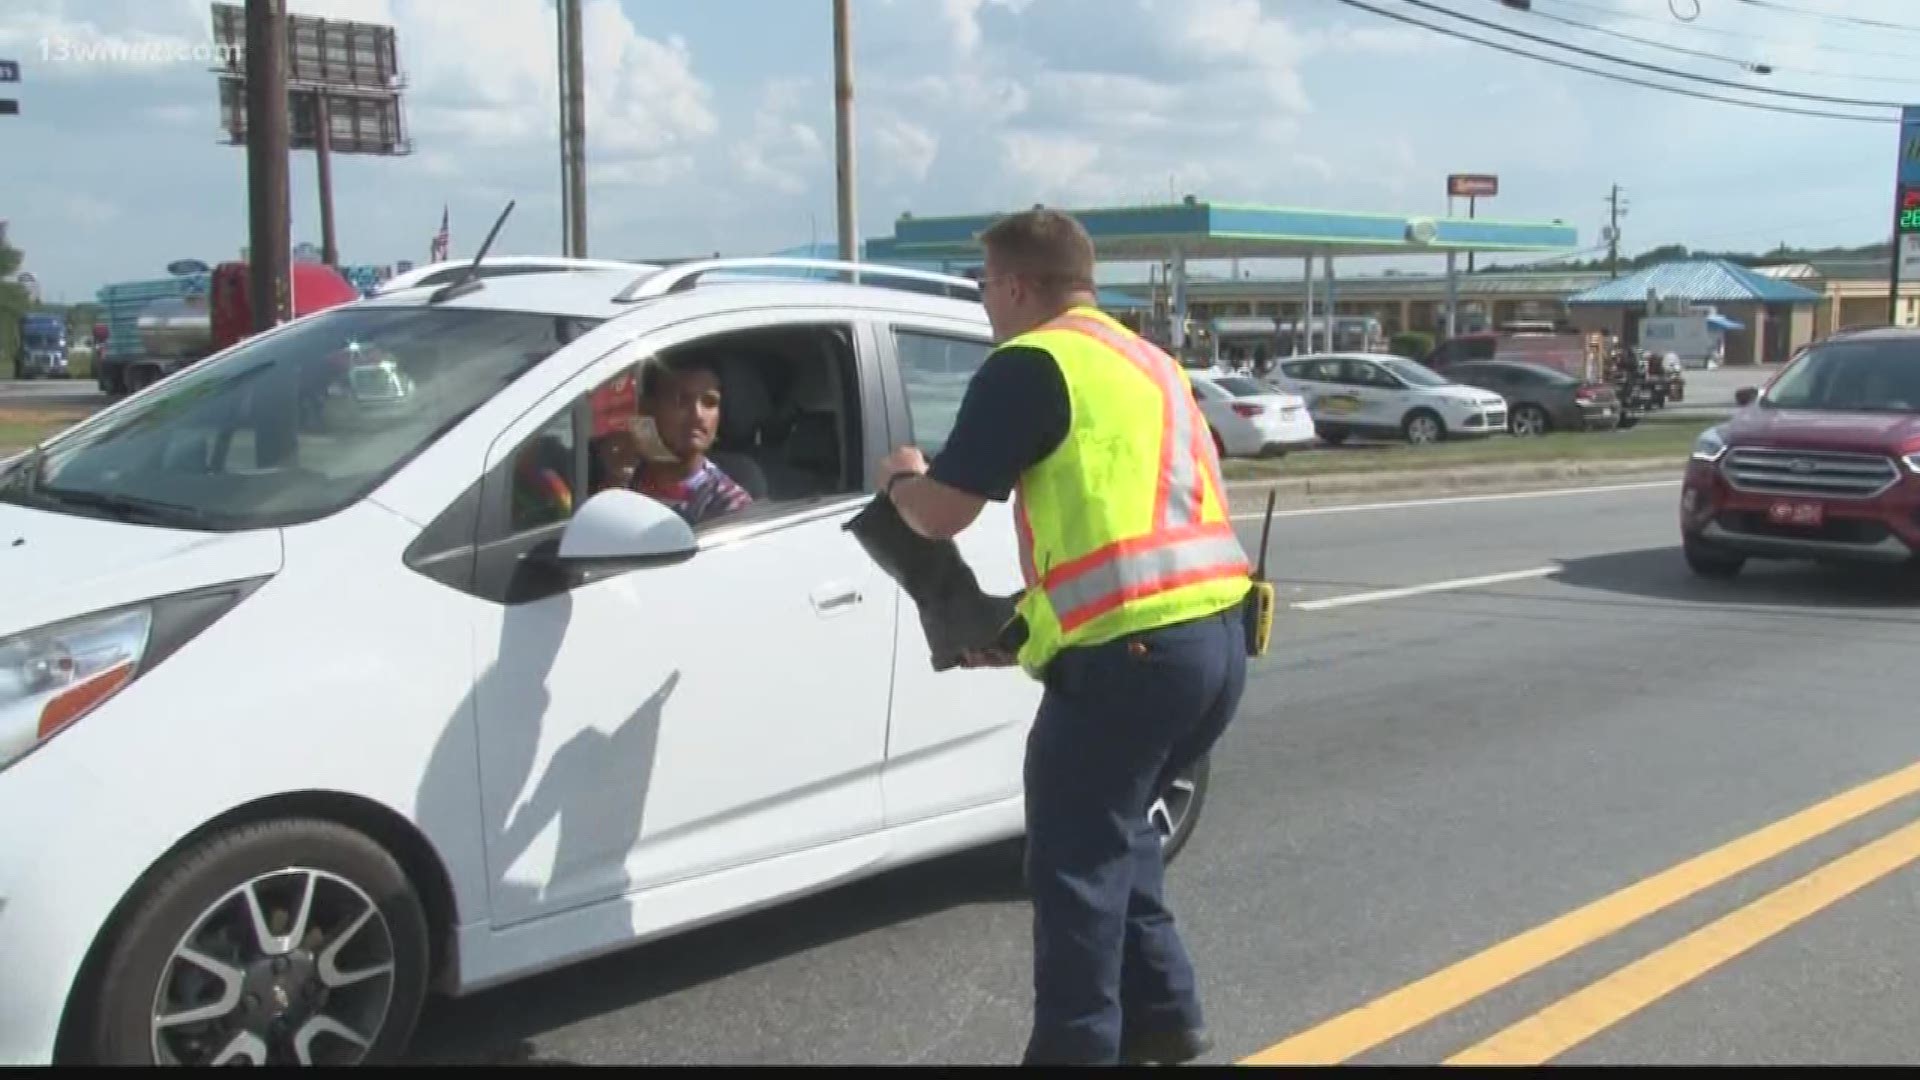 The Byron Fire Department began their annual "Fill the Boot" campaign Friday. Every Friday afternoon in July will be devoted to collecting money towards a good cause.